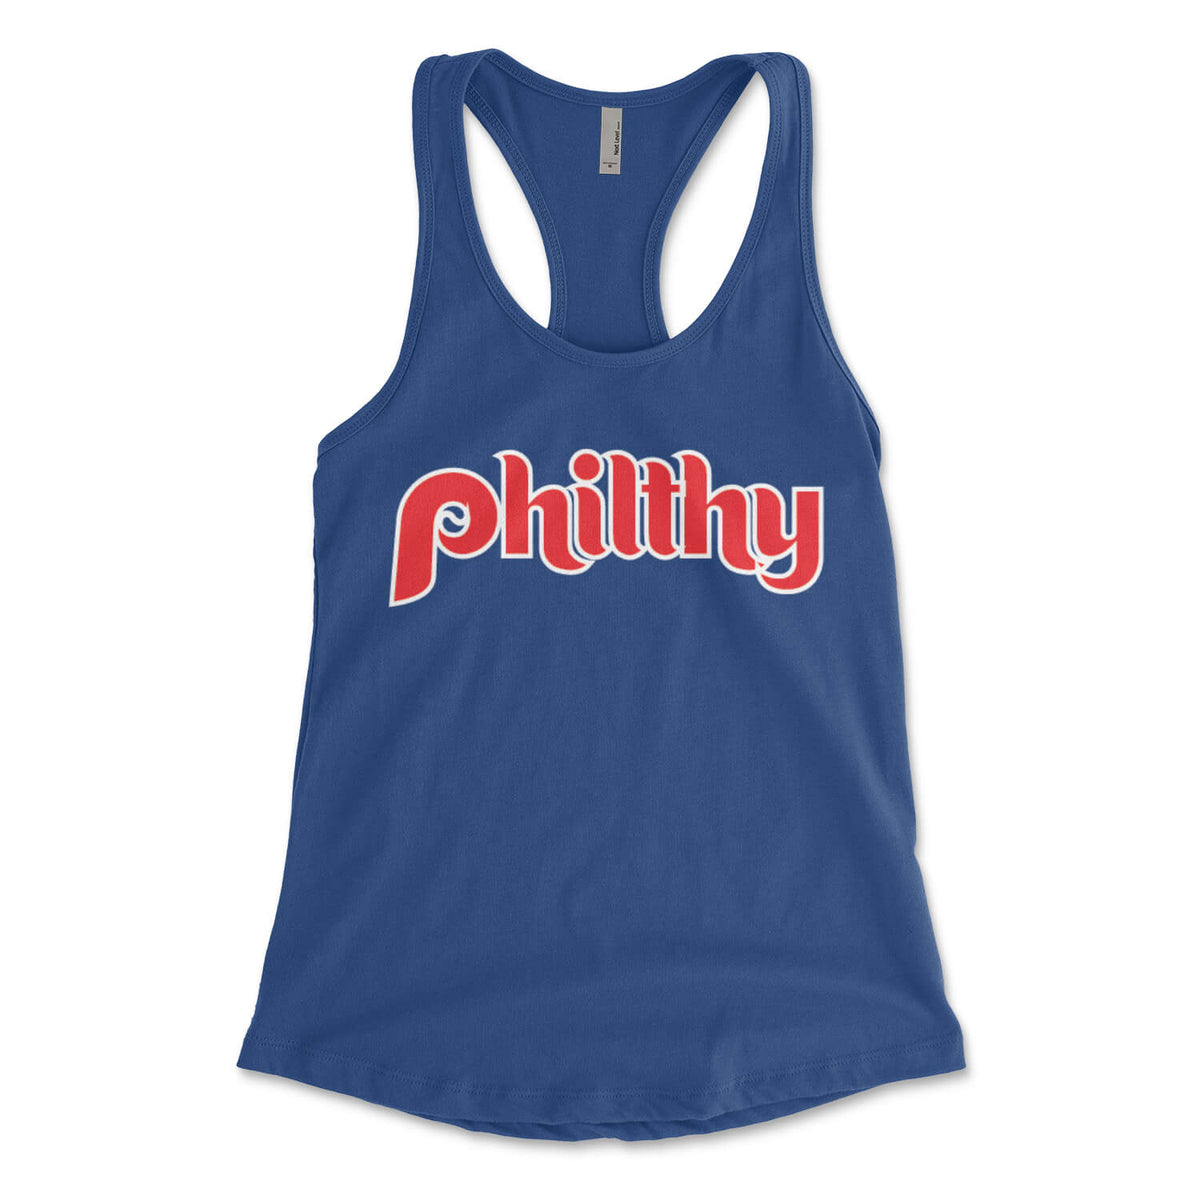 Philadelphia Phillies Philthy royal blue womens racerback tank top from Phillygoat 